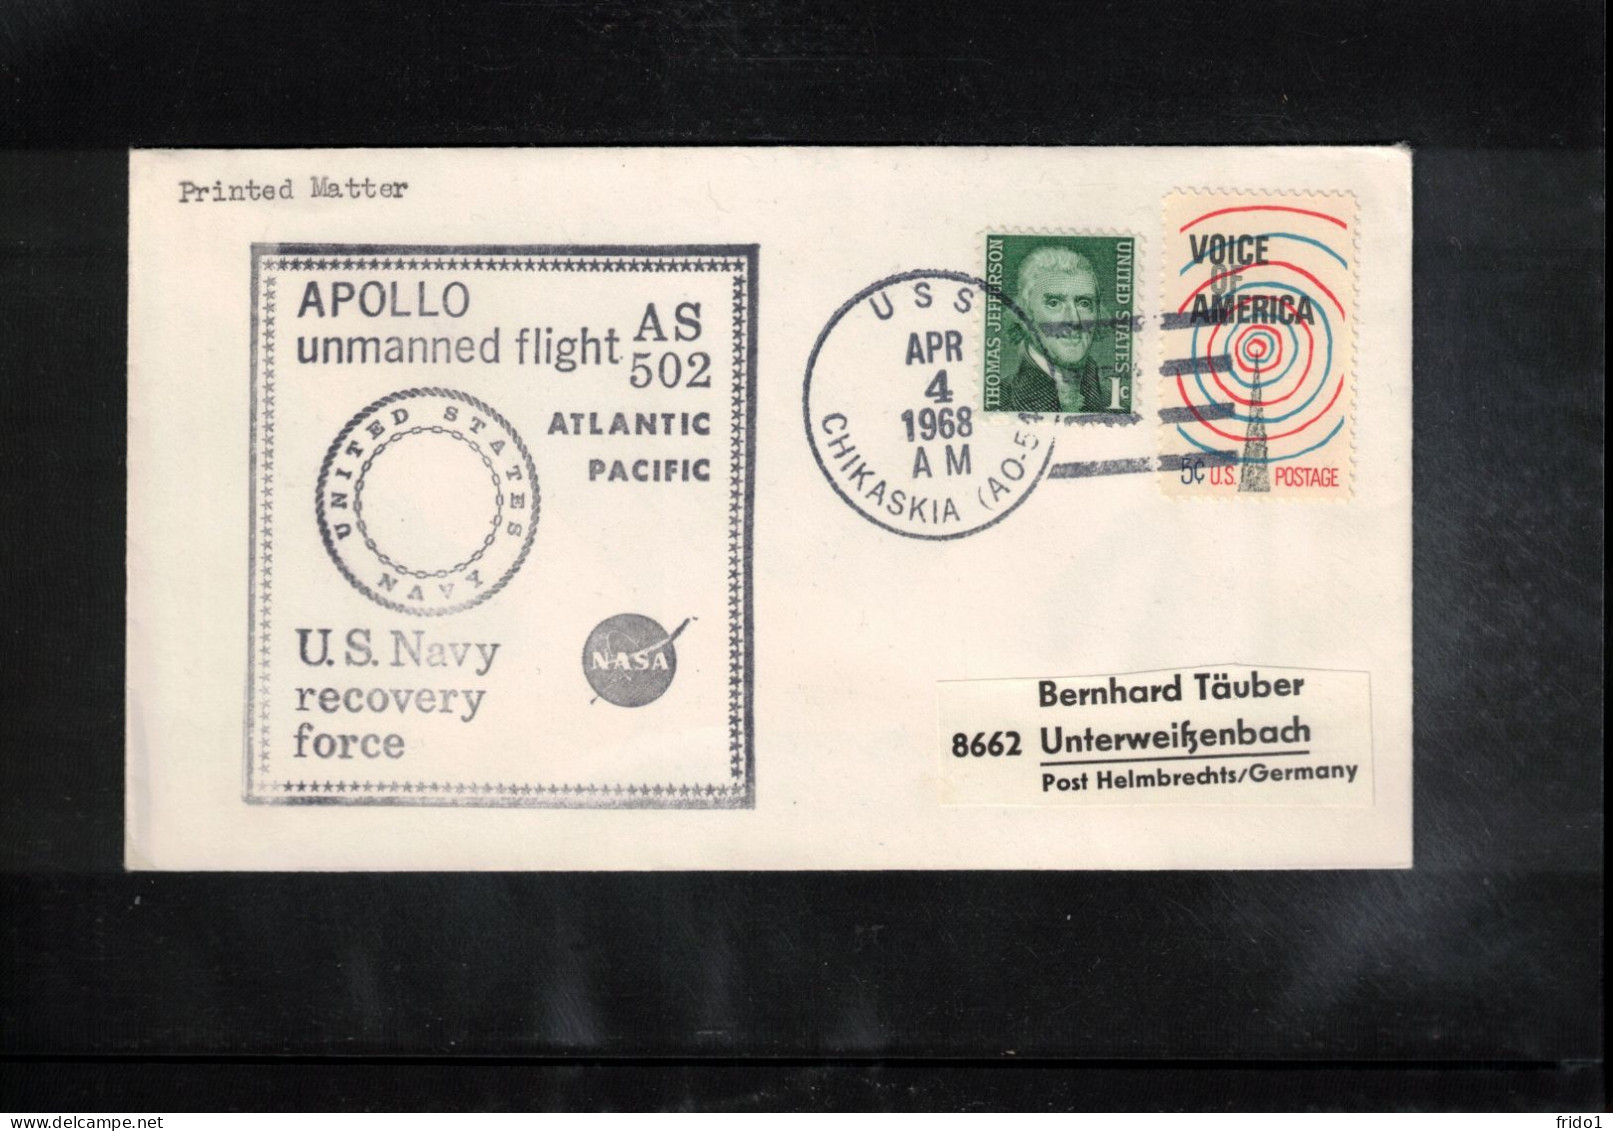 USA 1968 Space / Weltraum Apollo Unmanned Flight AS 502 - US Navy Recovery Force Ship USS Chikaskia Interesting Cover - USA